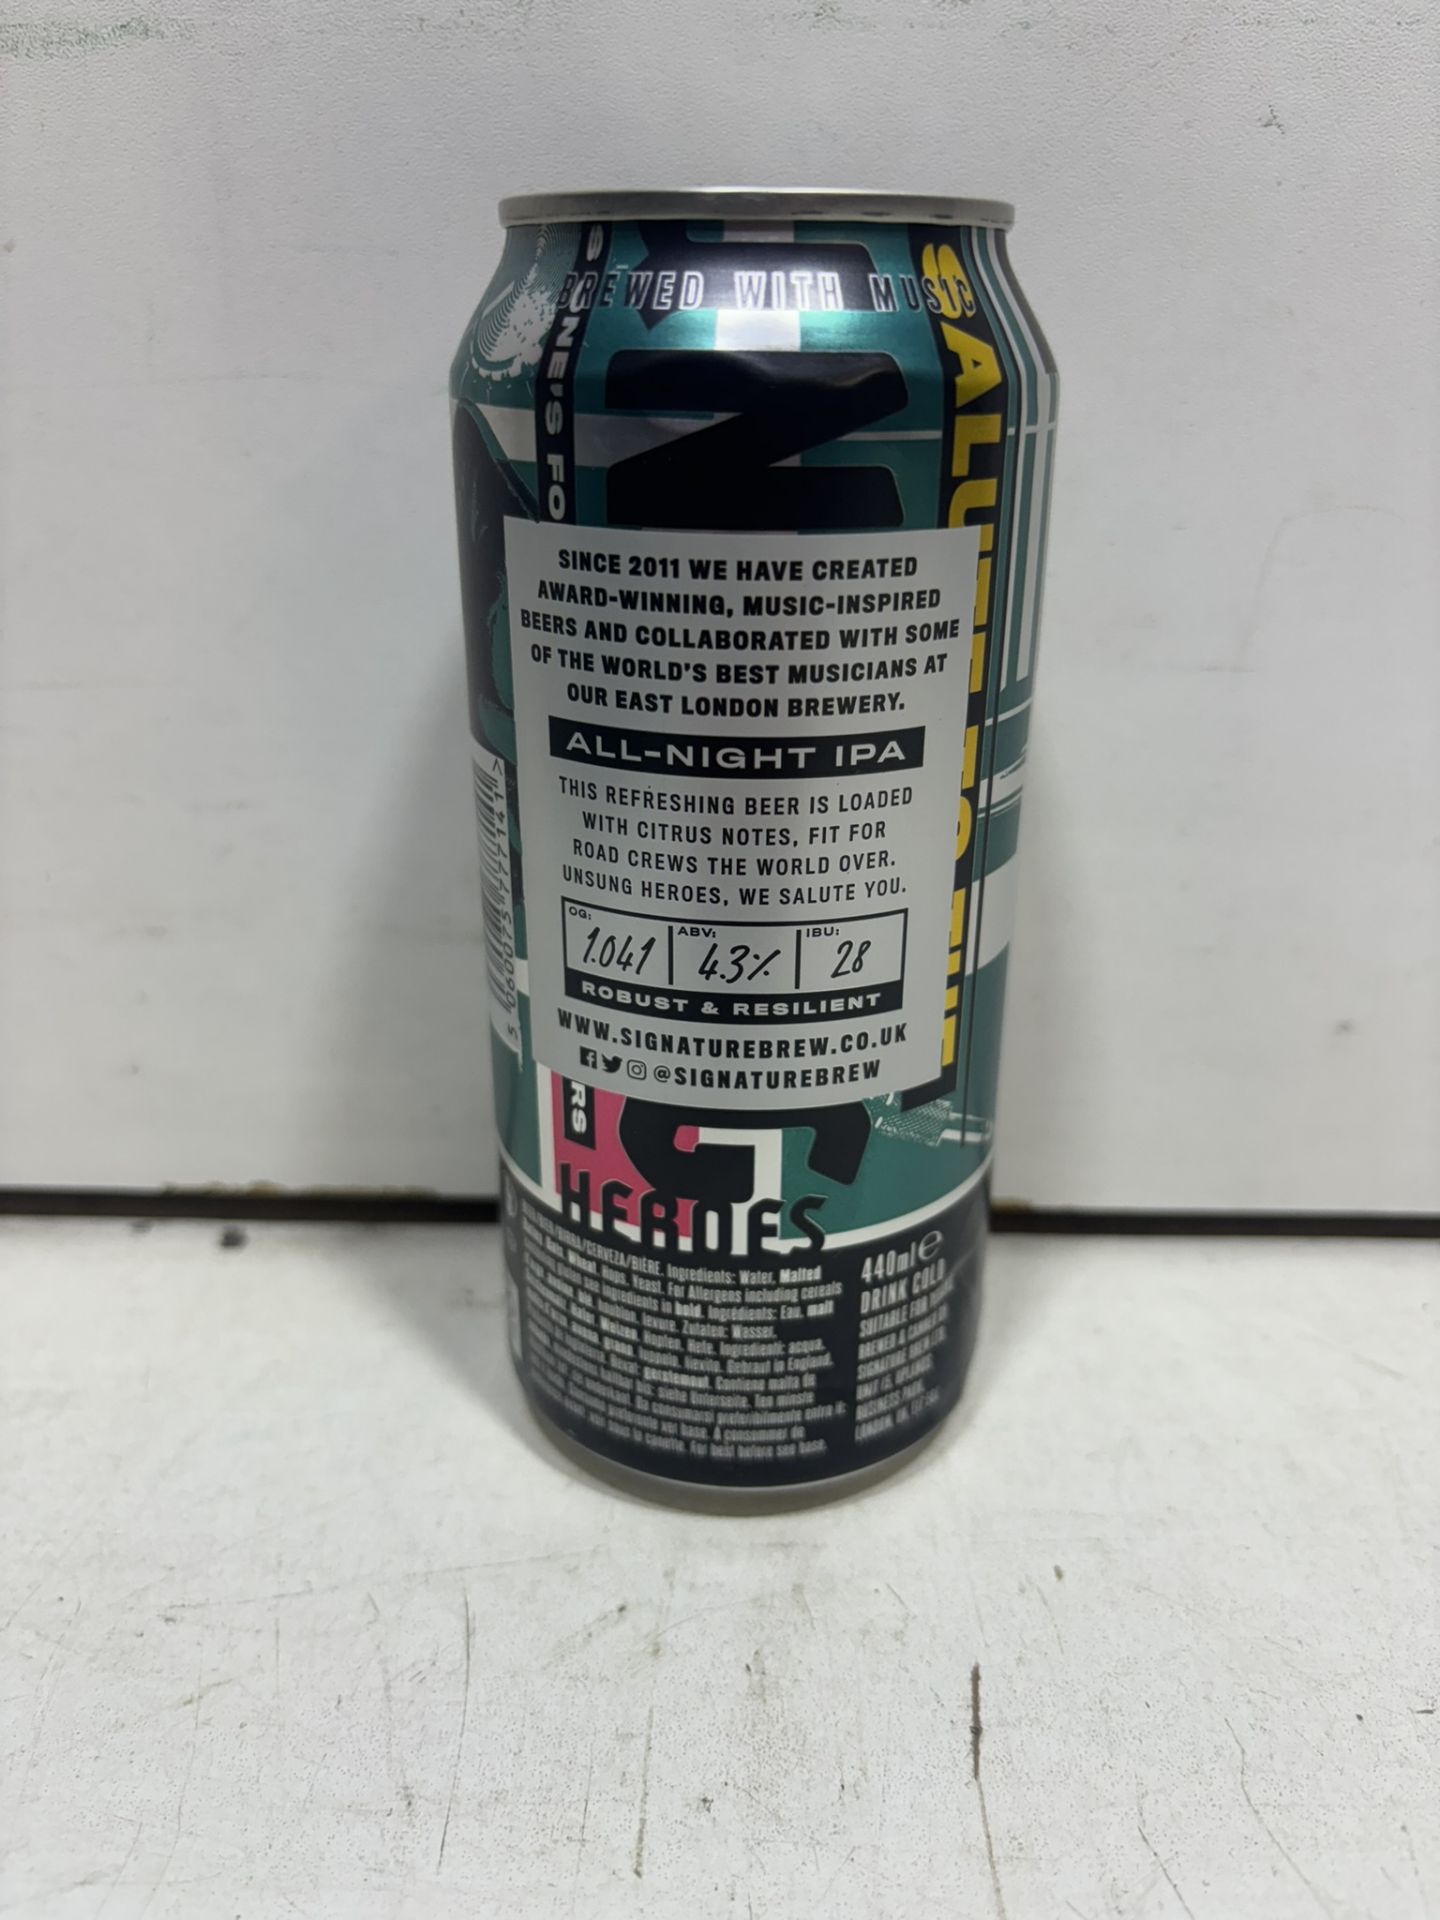 9 X Cans Of Signature Brew Roadie All Night Ipas 440Ml - Image 2 of 4